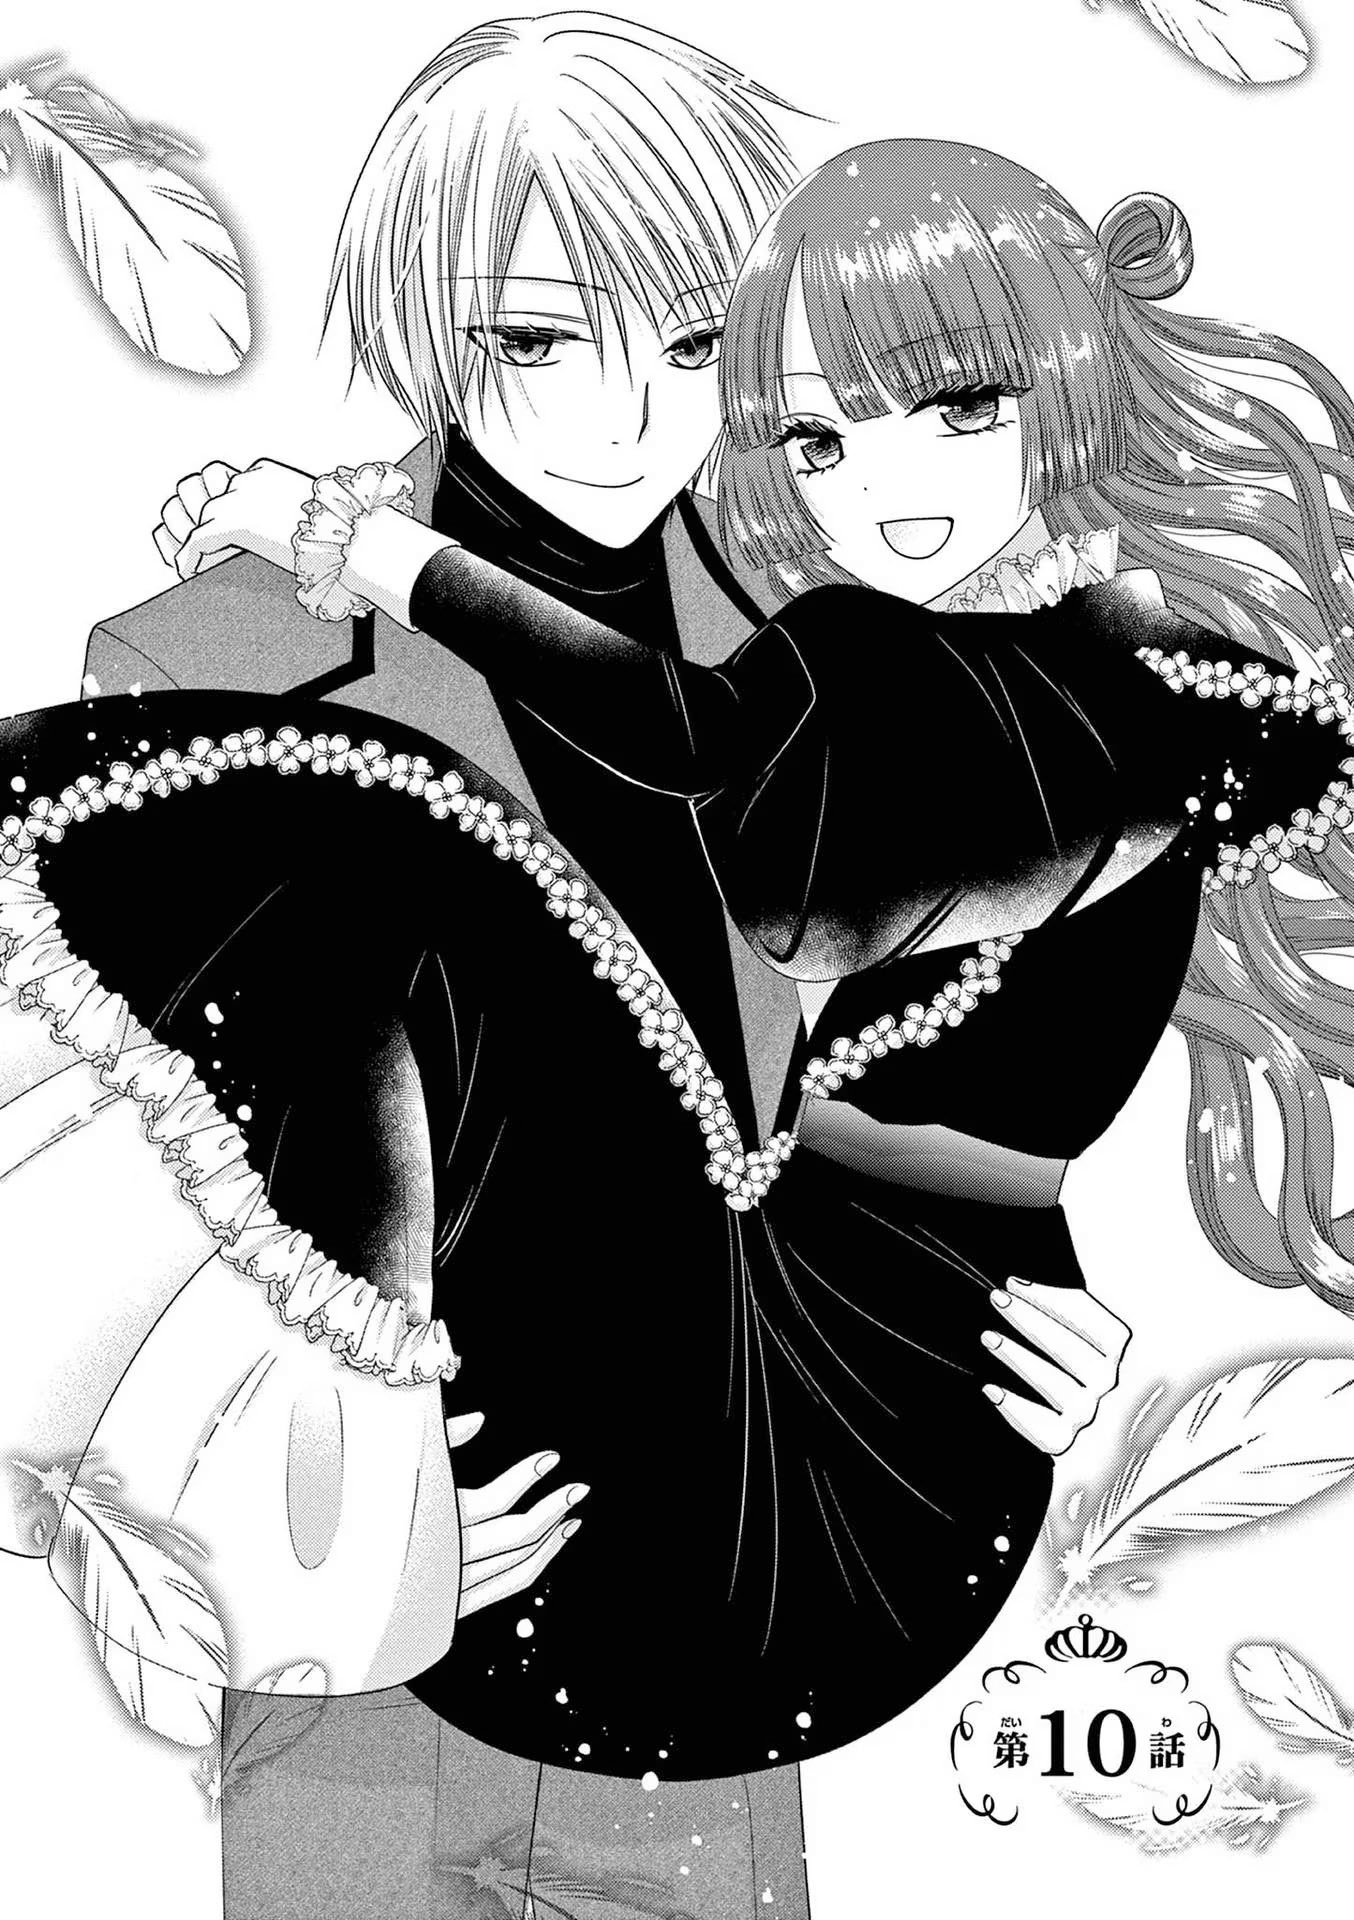 The Villainess Wants To Punish The Sadistic Prince Vol.2 Chapter 10